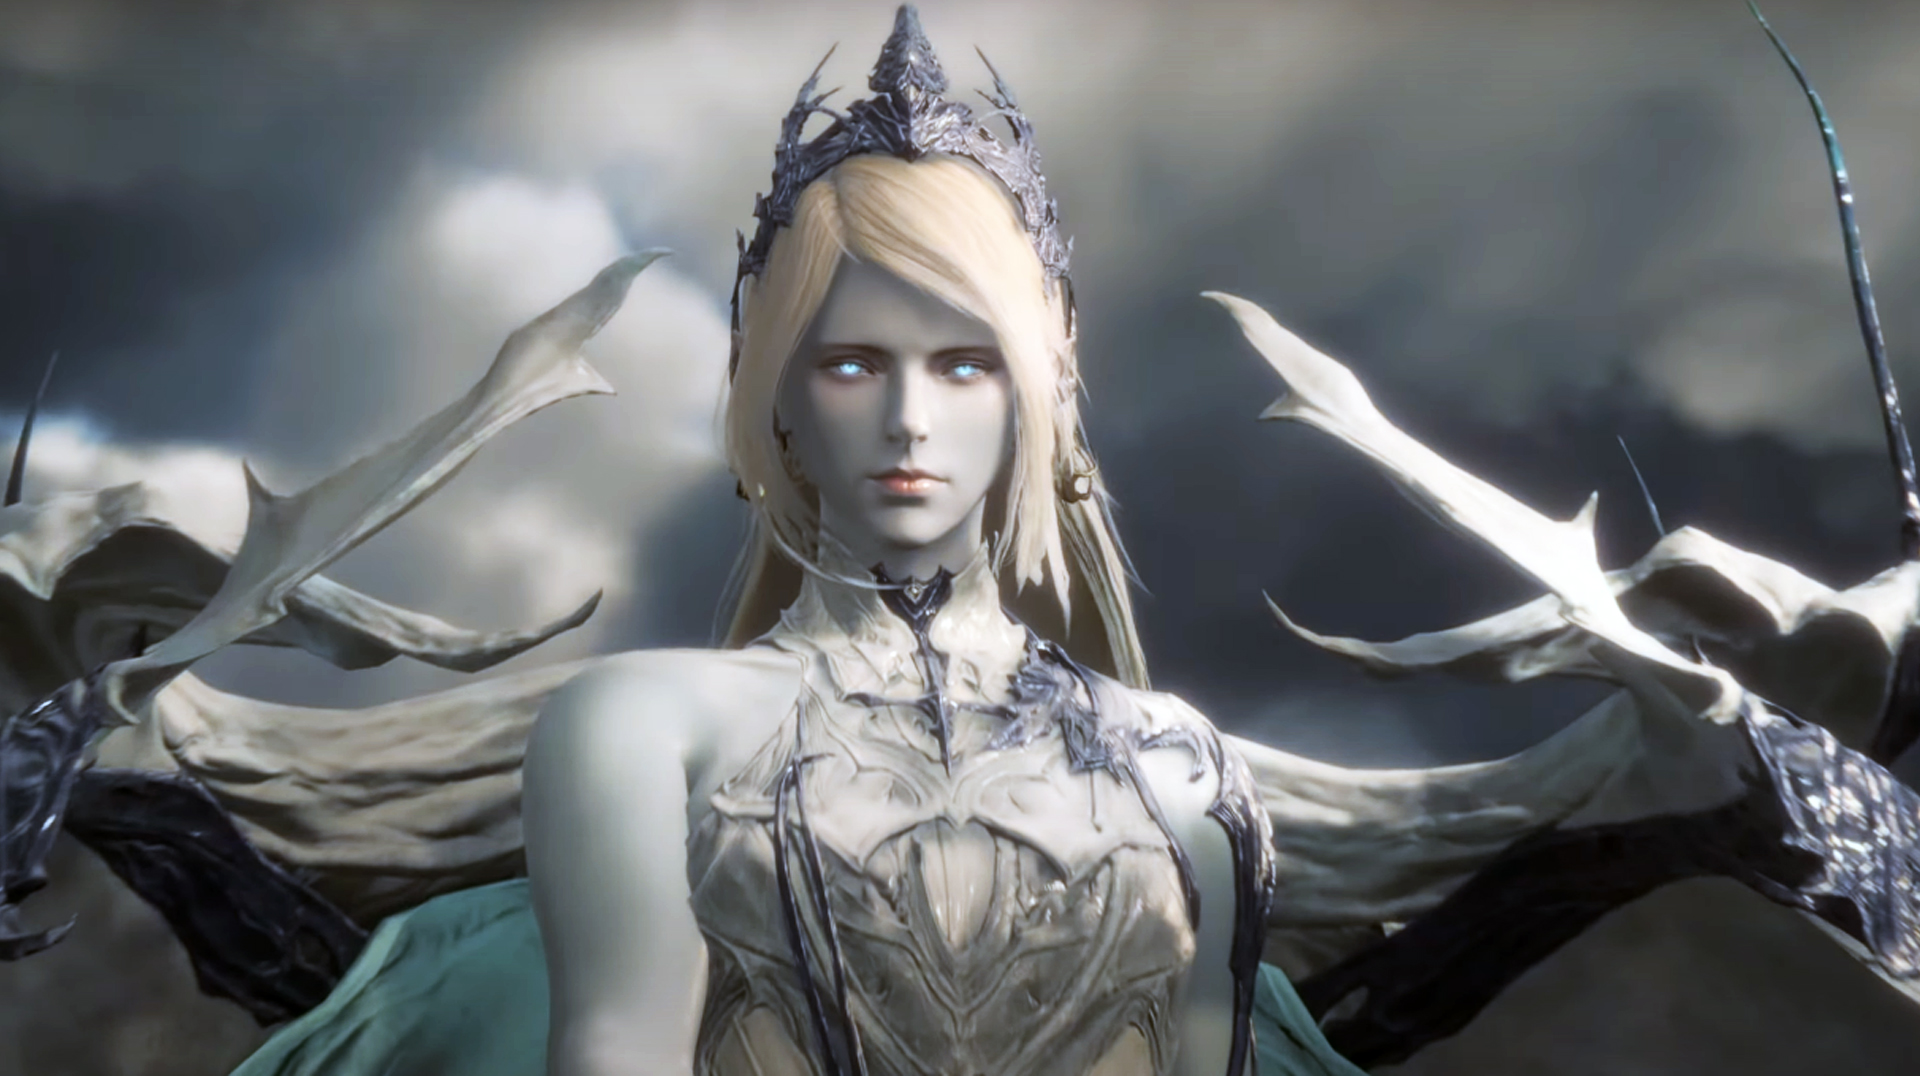 You can control Final Fantasy 16 summons, but not companions